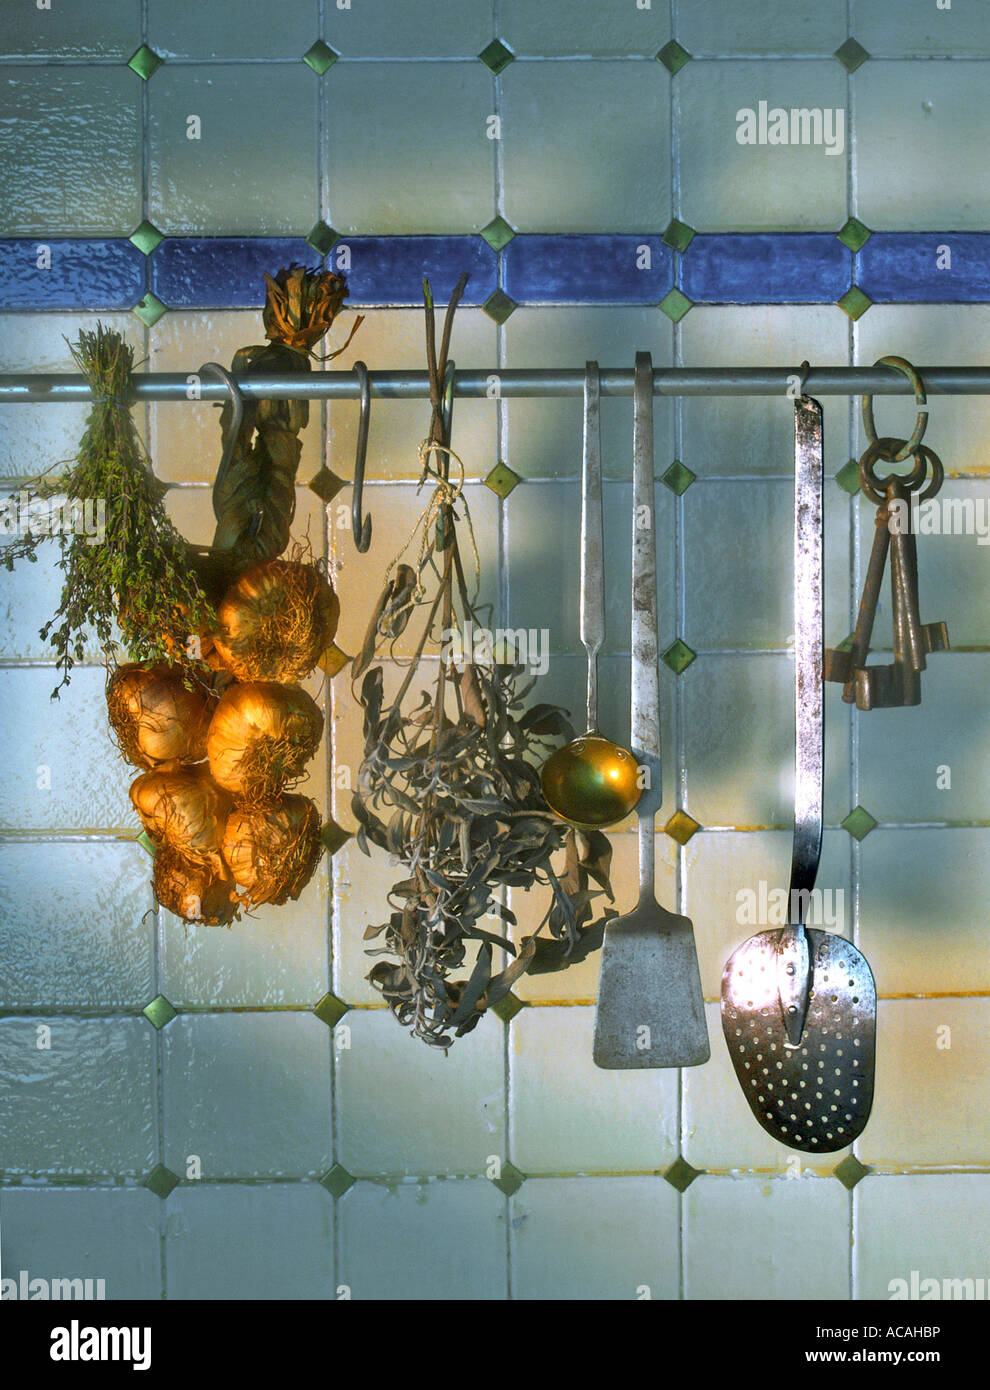 Tiled wall with garlic, dried sage and kitchenware, old keys Stock Photo